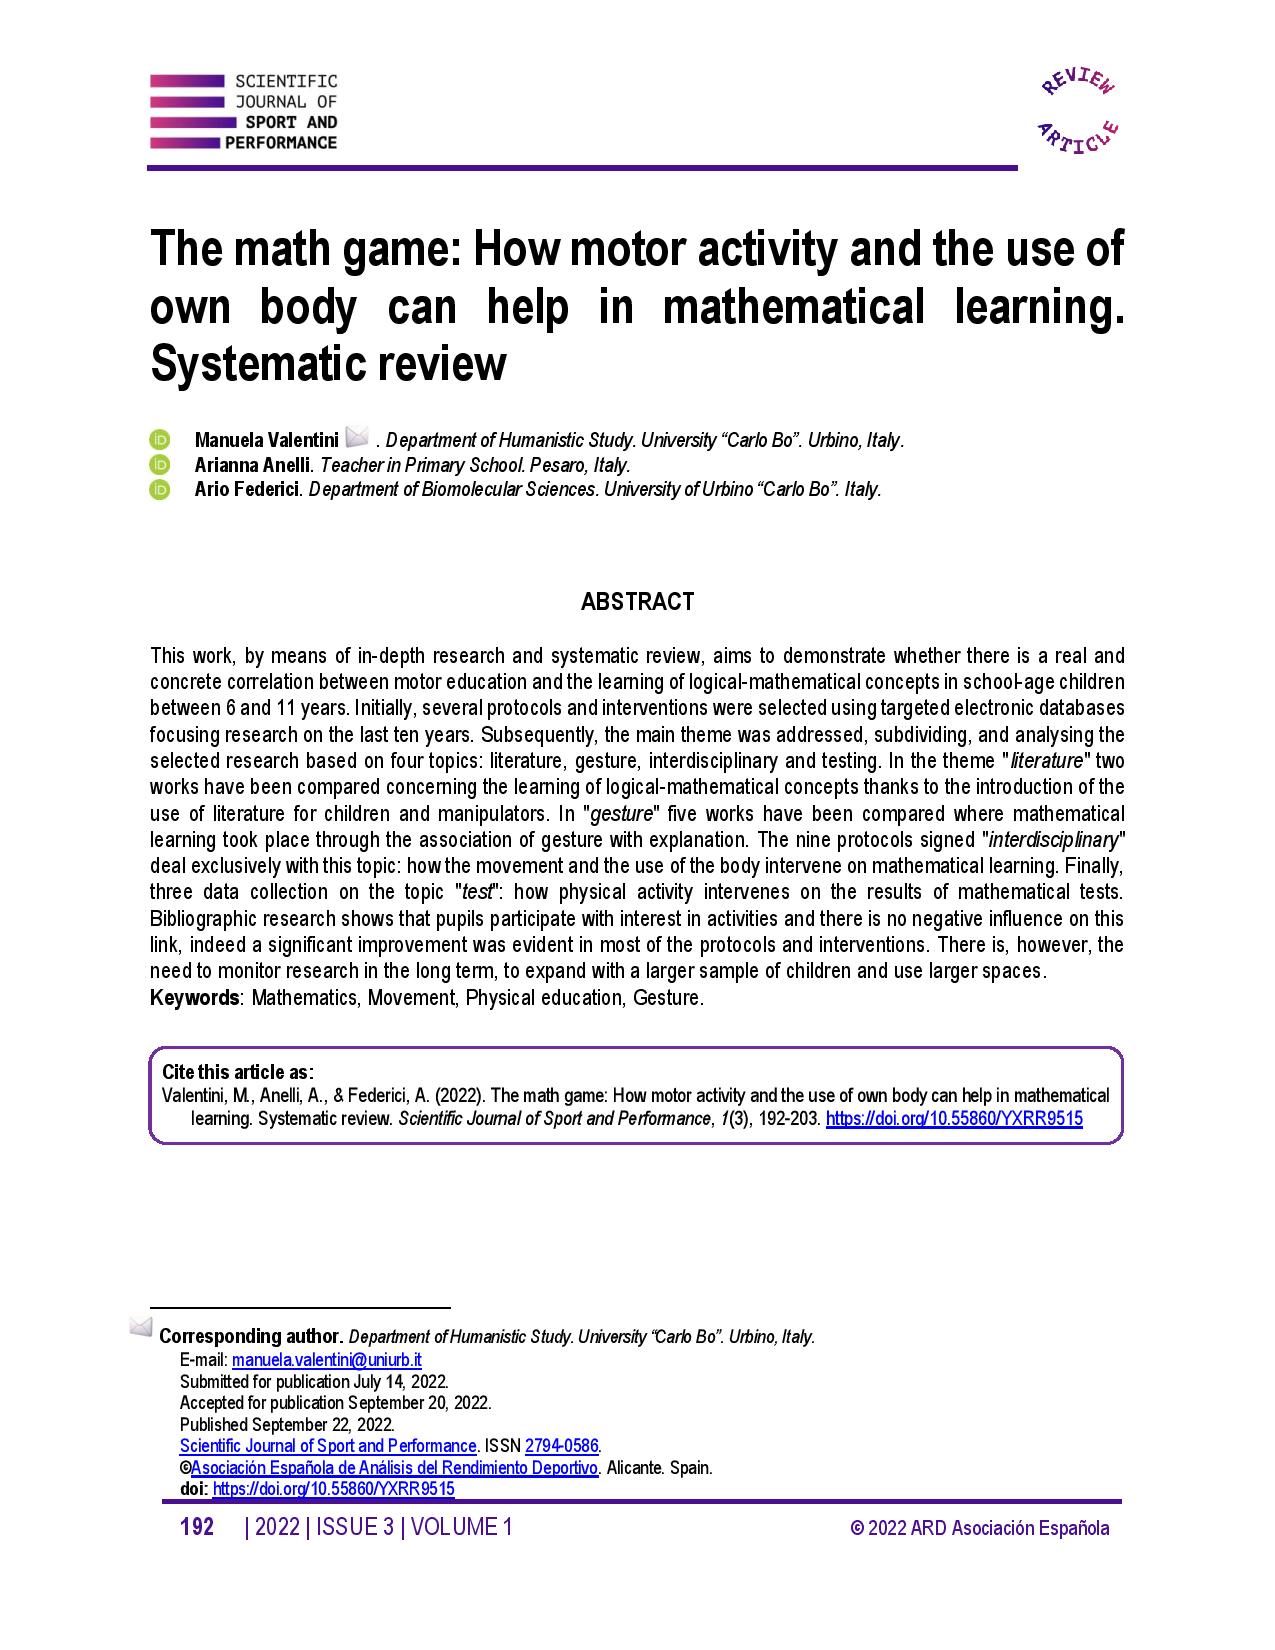 The math game: How motor activity and the use of own body can help in mathematical learning. Systematic review